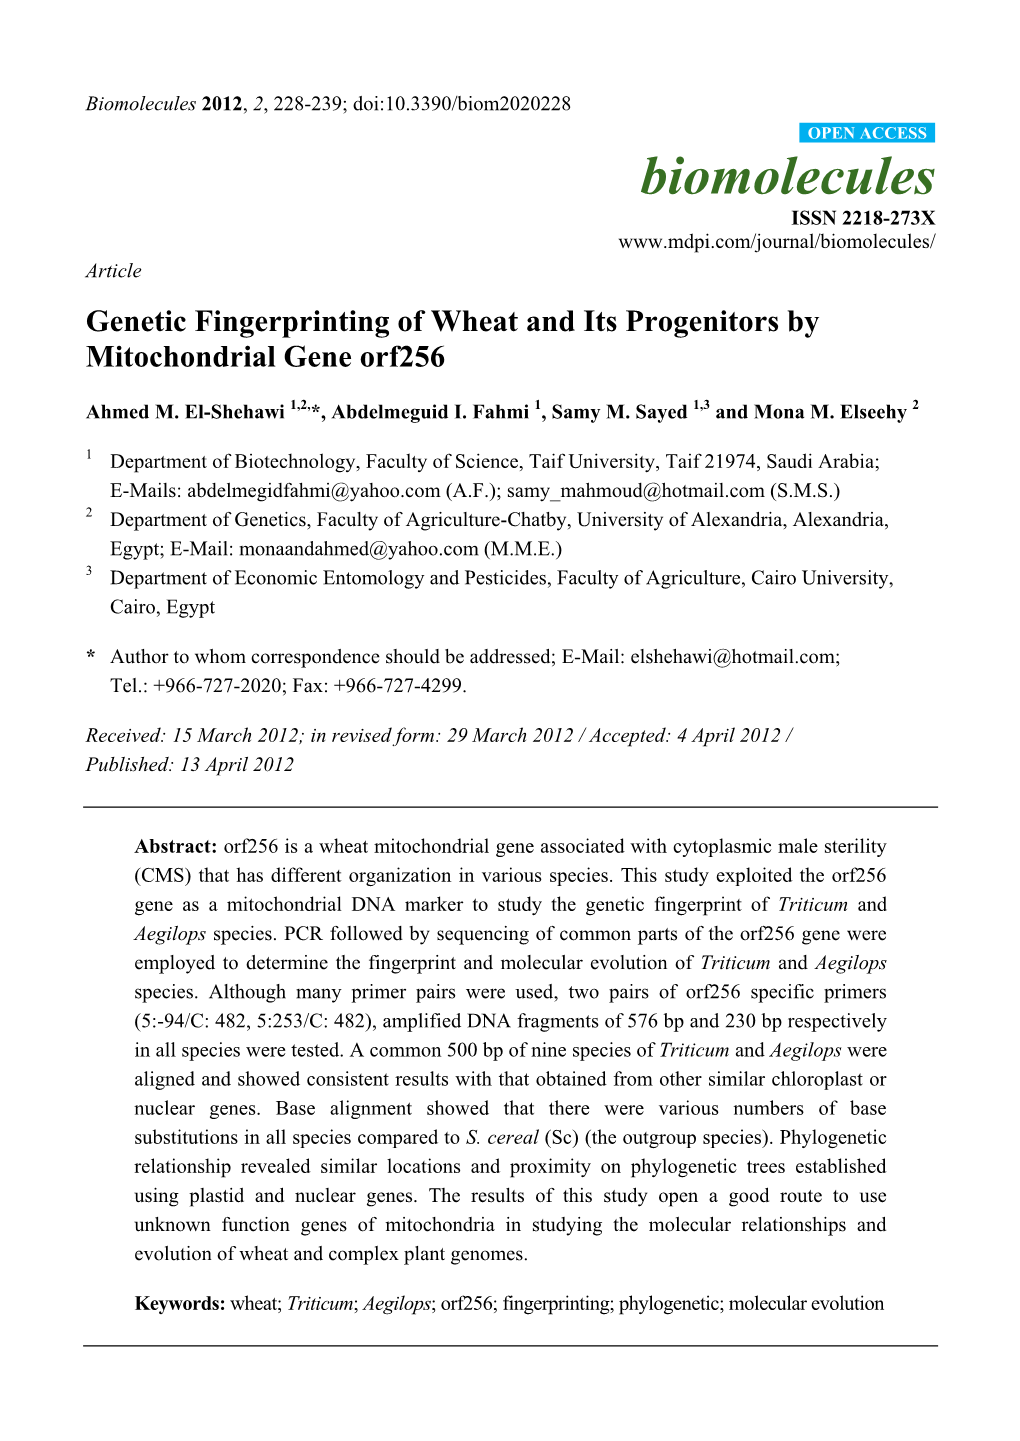 Genetic Fingerprinting of Wheat and Its Progenitors by Mitochondrial Gene Orf256